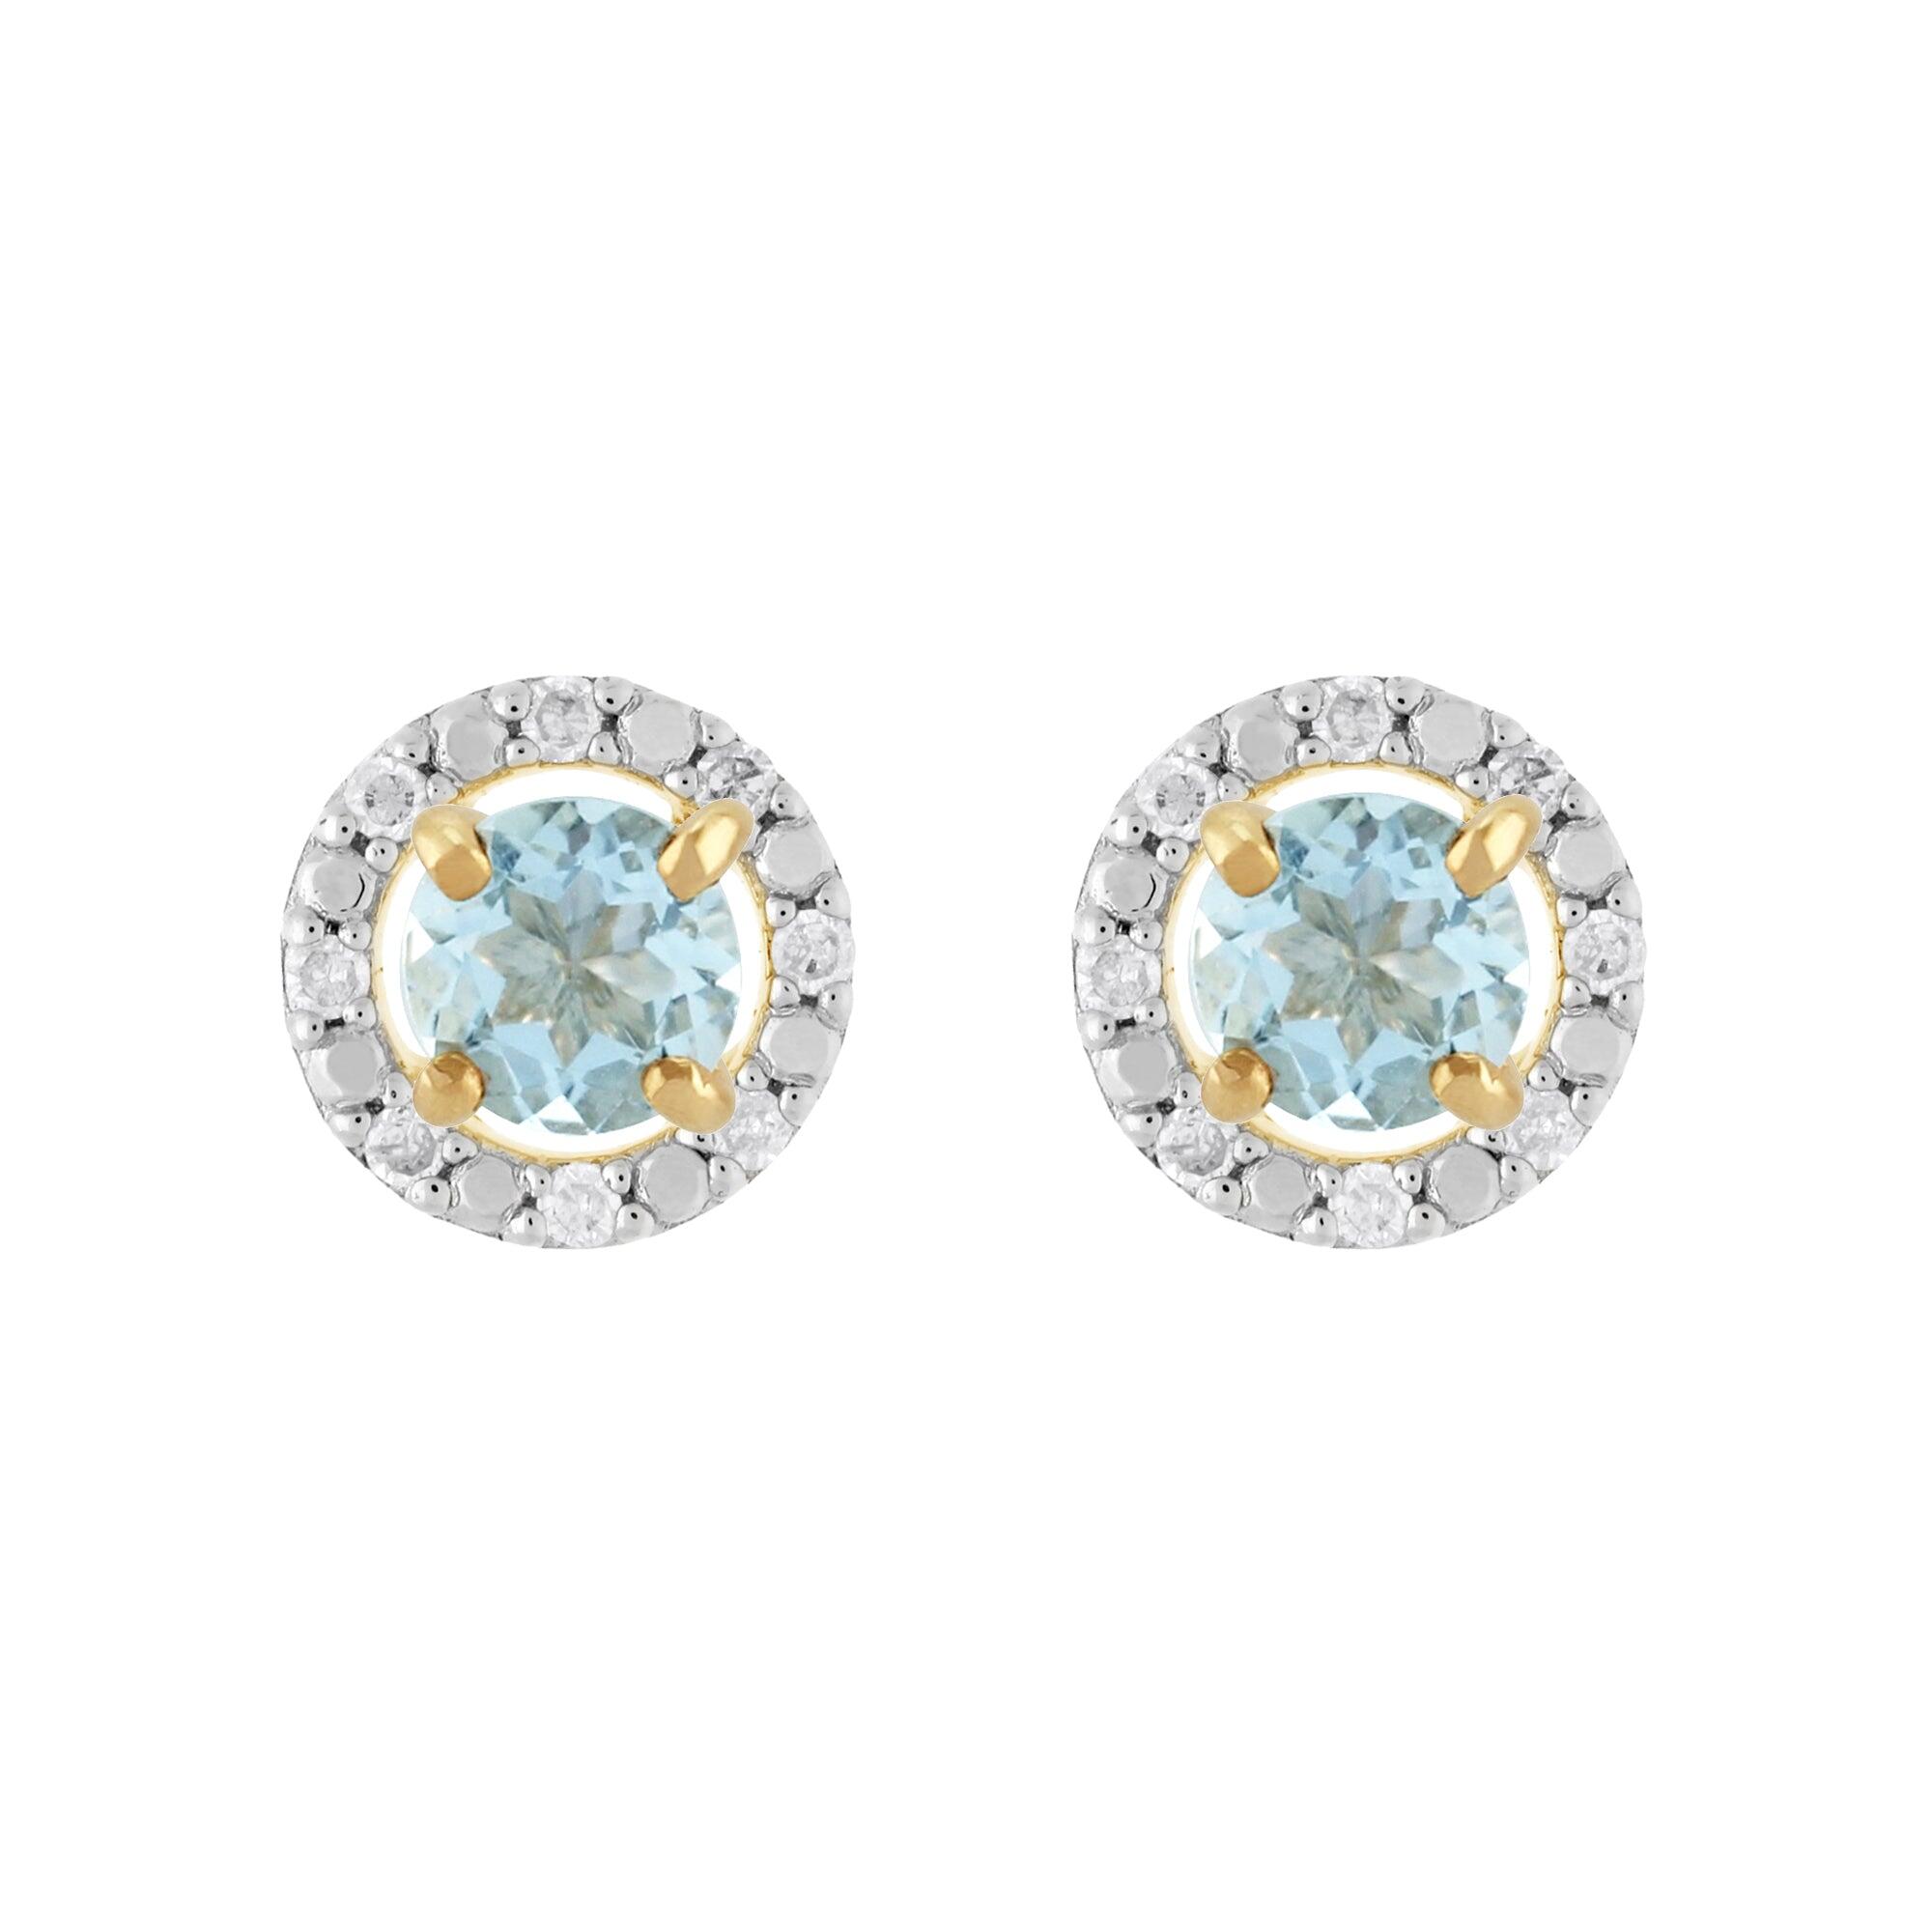 Classic Round Aquamarine Stud Earrings with Detachable Diamond Round Earrings Jacket Set in 9ct Yellow Gold